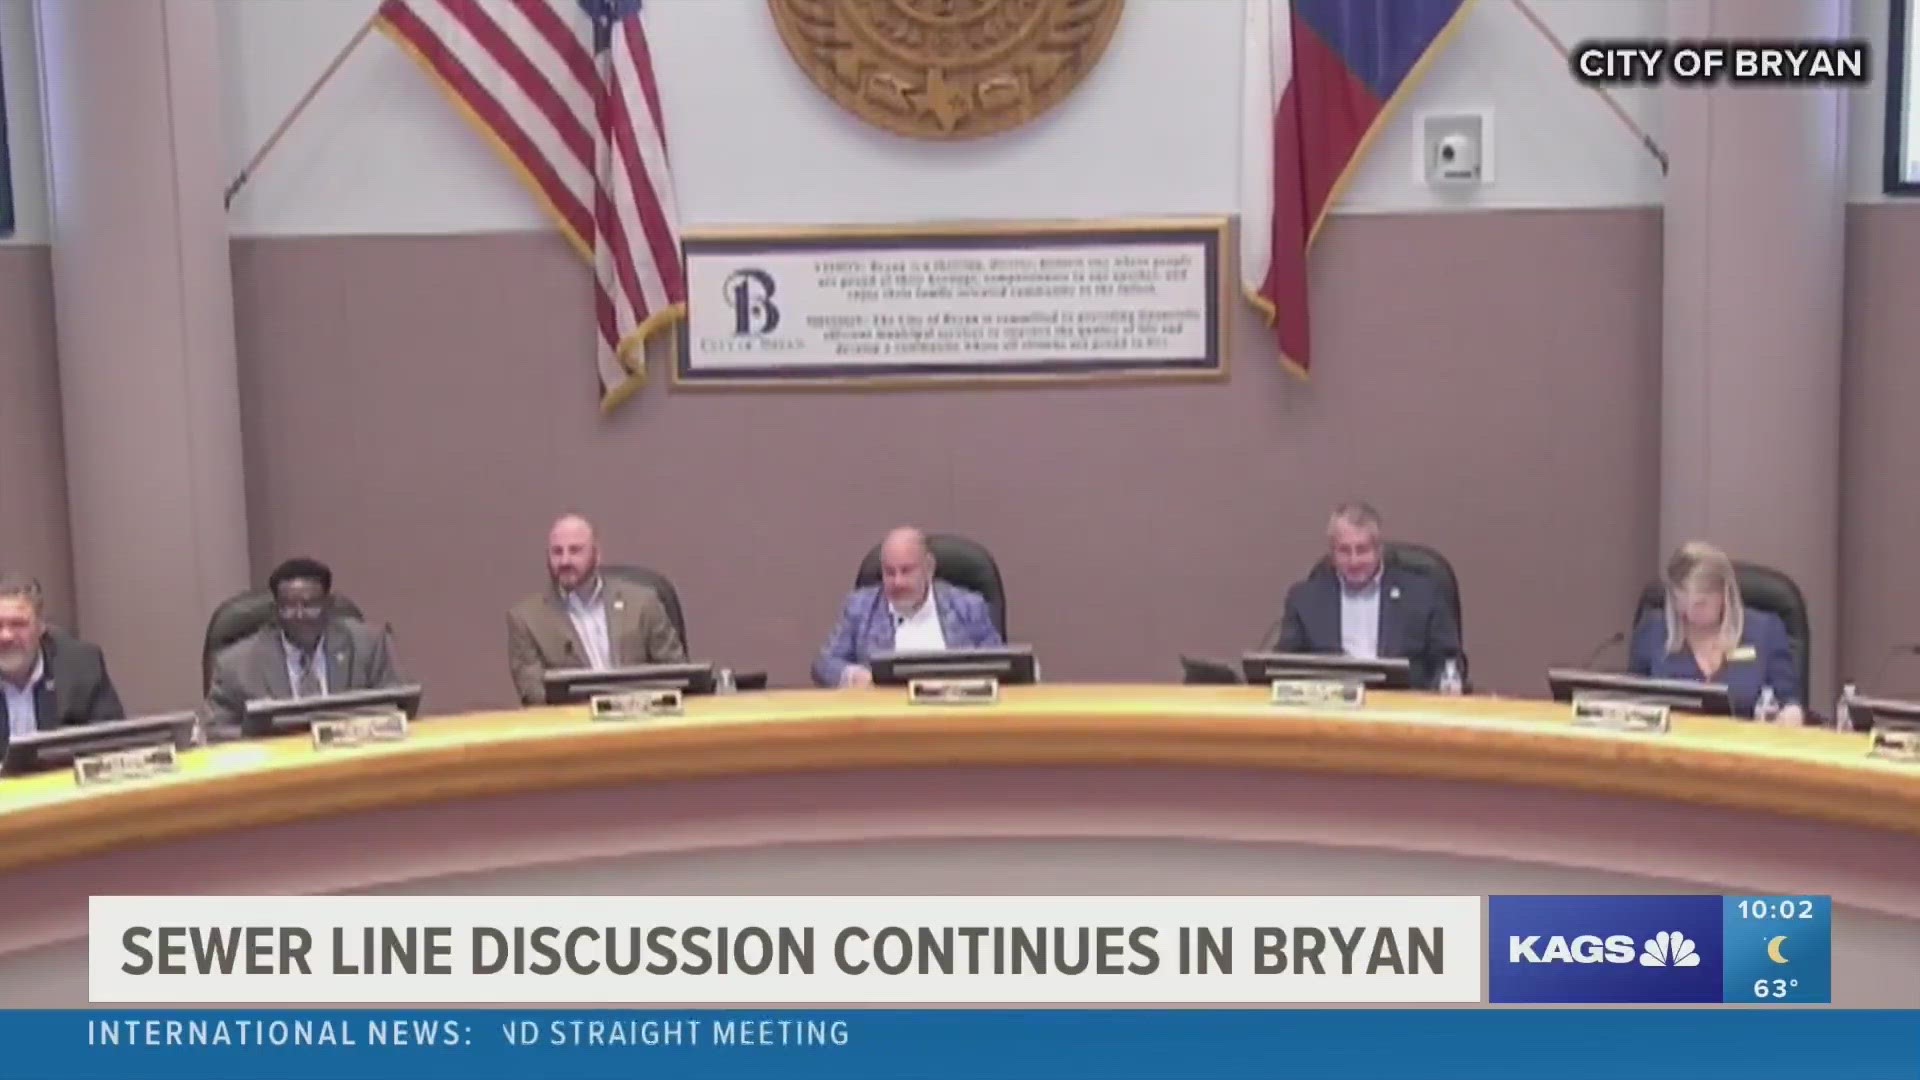 As the discussions of a potential sewer line grind to a halt between the cities of Bryan and College Station, residents continue to push for a favorable ruling.